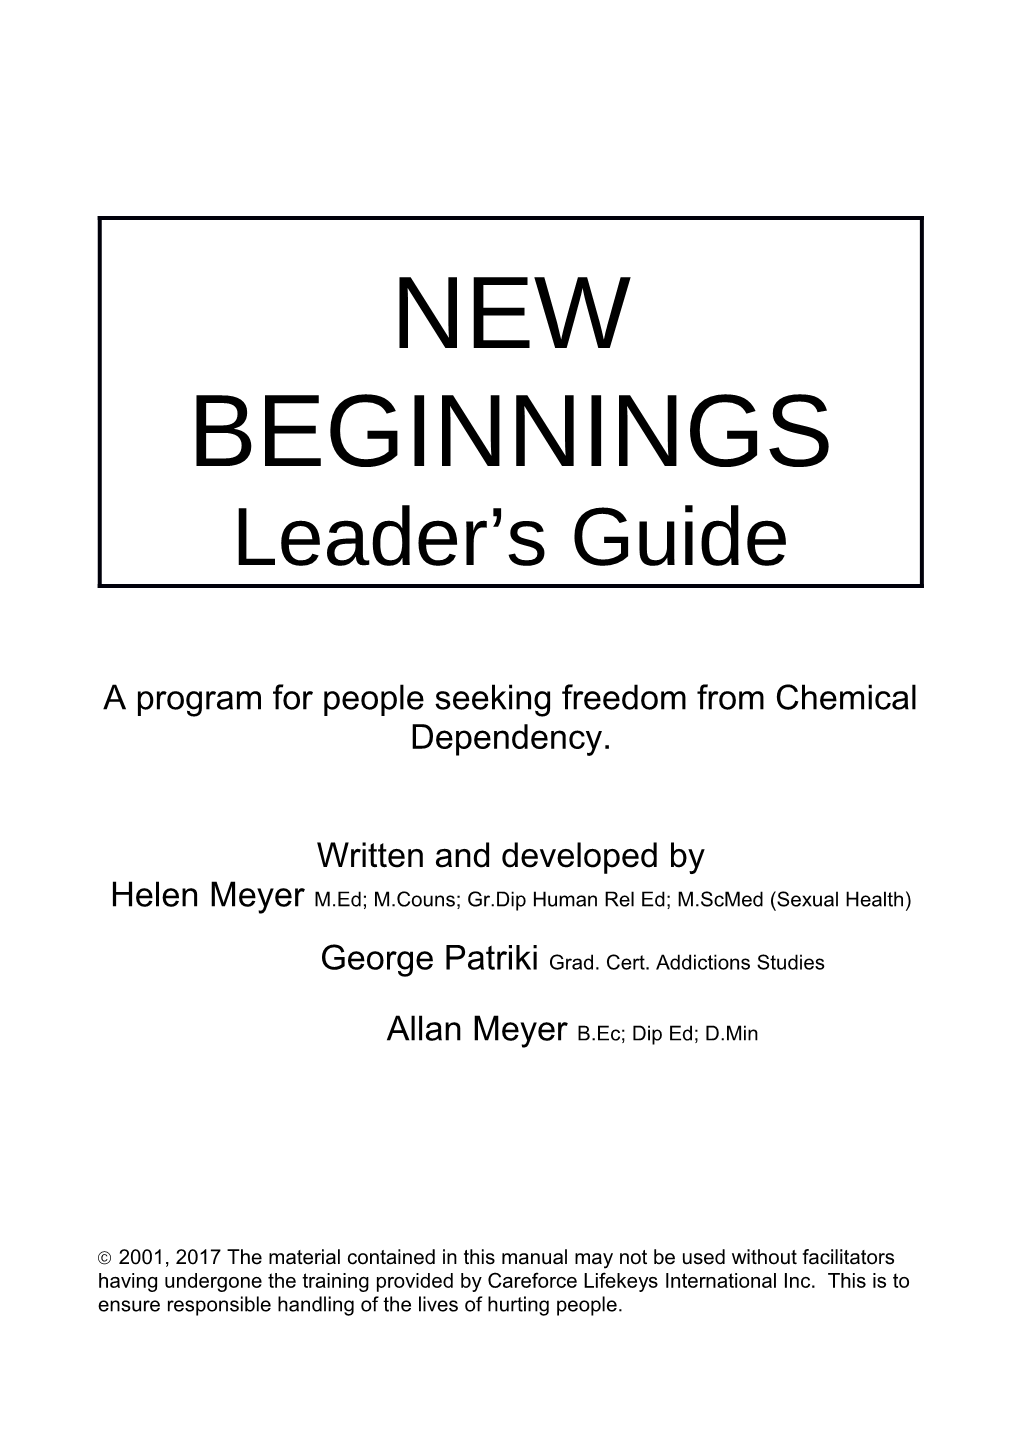 A Program for People Seeking Freedom from Chemical Dependency